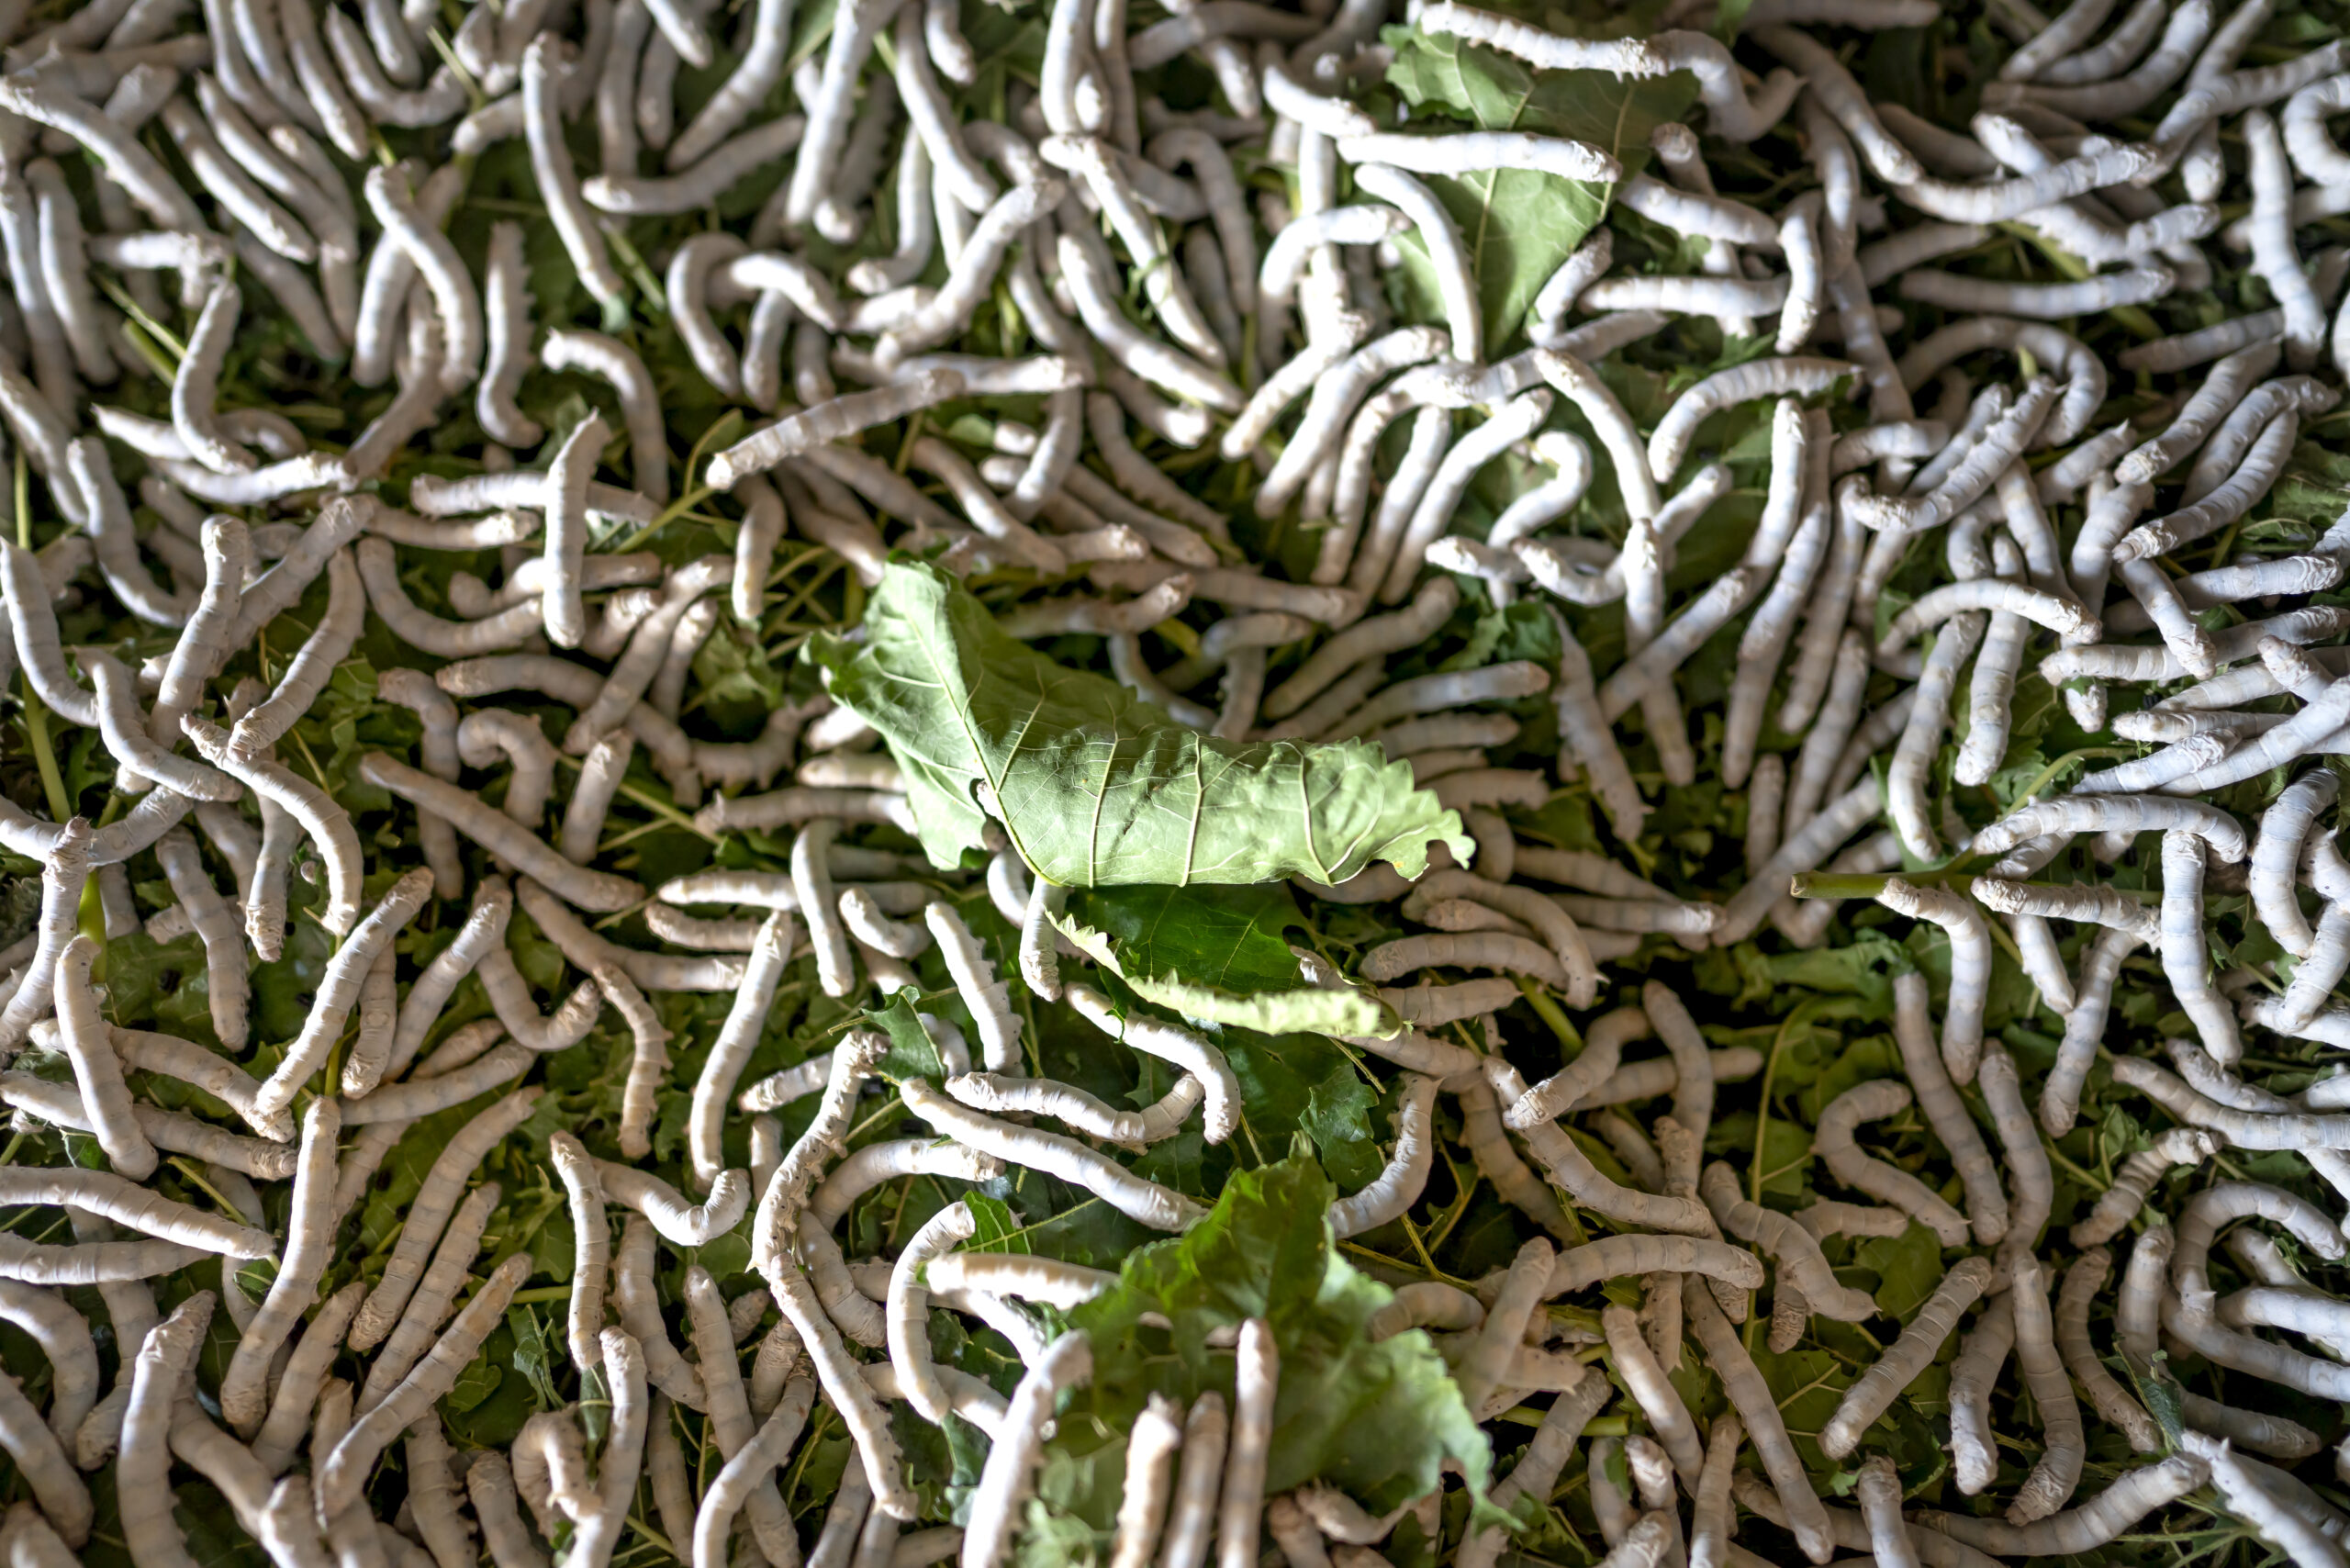 Heap of silkworms eating mulberry leaves